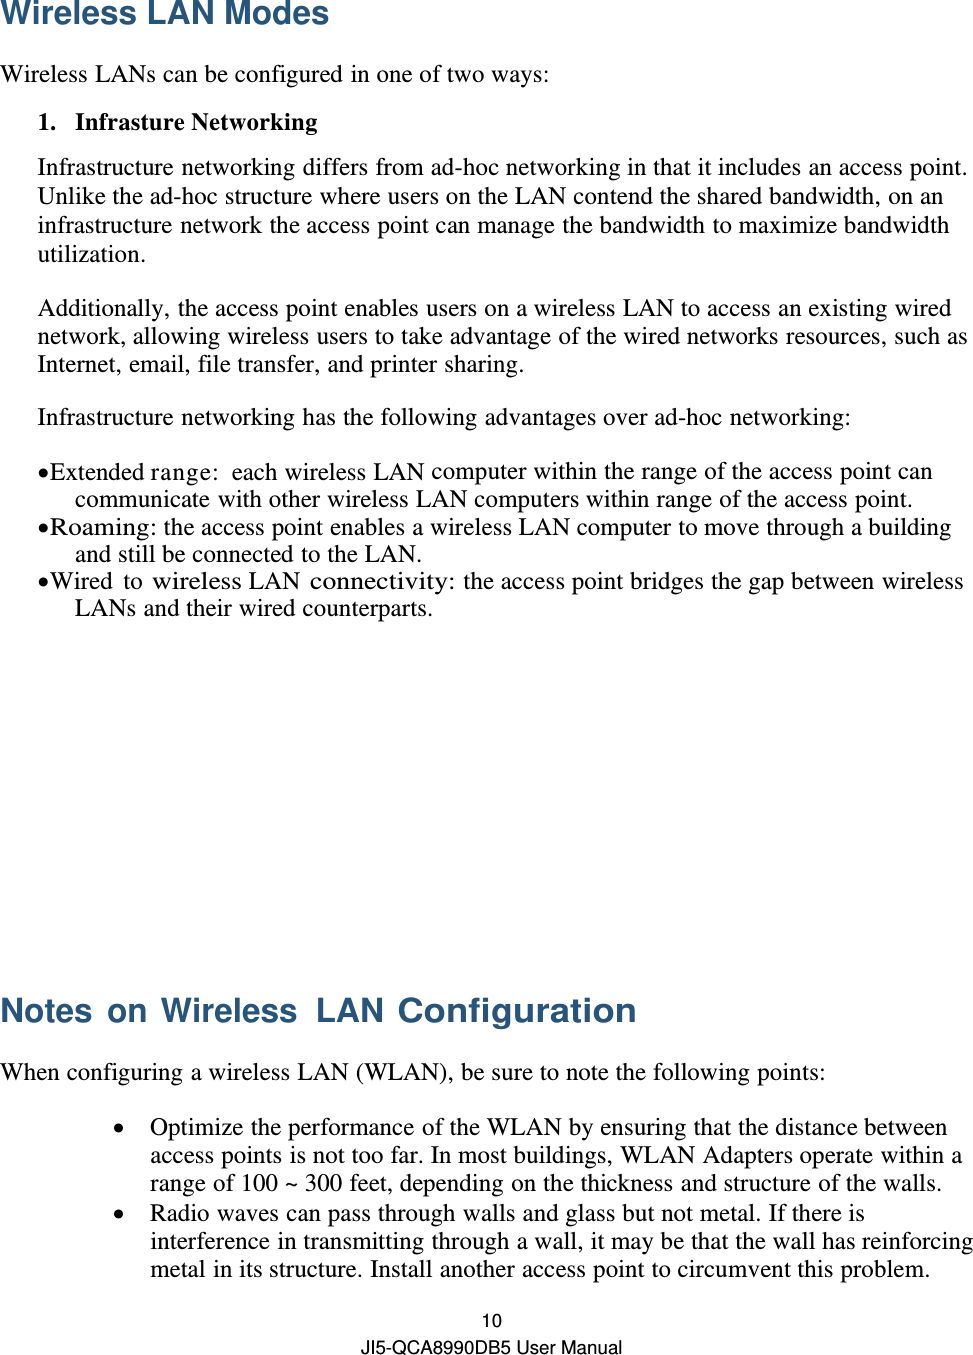  10 JI5-QCA8990DB5 User Manual Wireless LAN Modes   Wireless LANs can be configured in one of two ways: 1. Infrasture Networking Infrastructure networking differs from ad-hoc networking in that it includes an access point. Unlike the ad-hoc structure where users on the LAN contend the shared bandwidth, on an infrastructure network the access point can manage the bandwidth to maximize bandwidth utilization. Additionally, the access point enables users on a wireless LAN to access an existing wired network, allowing wireless users to take advantage of the wired networks resources, such as Internet, email, file transfer, and printer sharing. Infrastructure networking has the following advantages over ad-hoc networking:  Extended range:  each wireless LAN computer within the range of the access point can communicate with other wireless LAN computers within range of the access point.  Roaming: the access point enables a wireless LAN computer to move through a building and still be connected to the LAN.  Wired to wireless LAN connectivity: the access point bridges the gap between wireless LANs and their wired counterparts.       Notes on Wireless LAN Configuration When configuring a wireless LAN (WLAN), be sure to note the following points:  Optimize the performance of the WLAN by ensuring that the distance between access points is not too far. In most buildings, WLAN Adapters operate within a range of 100 ~ 300 feet, depending on the thickness and structure of the walls.  Radio waves can pass through walls and glass but not metal. If there is interference in transmitting through a wall, it may be that the wall has reinforcing metal in its structure. Install another access point to circumvent this problem. 